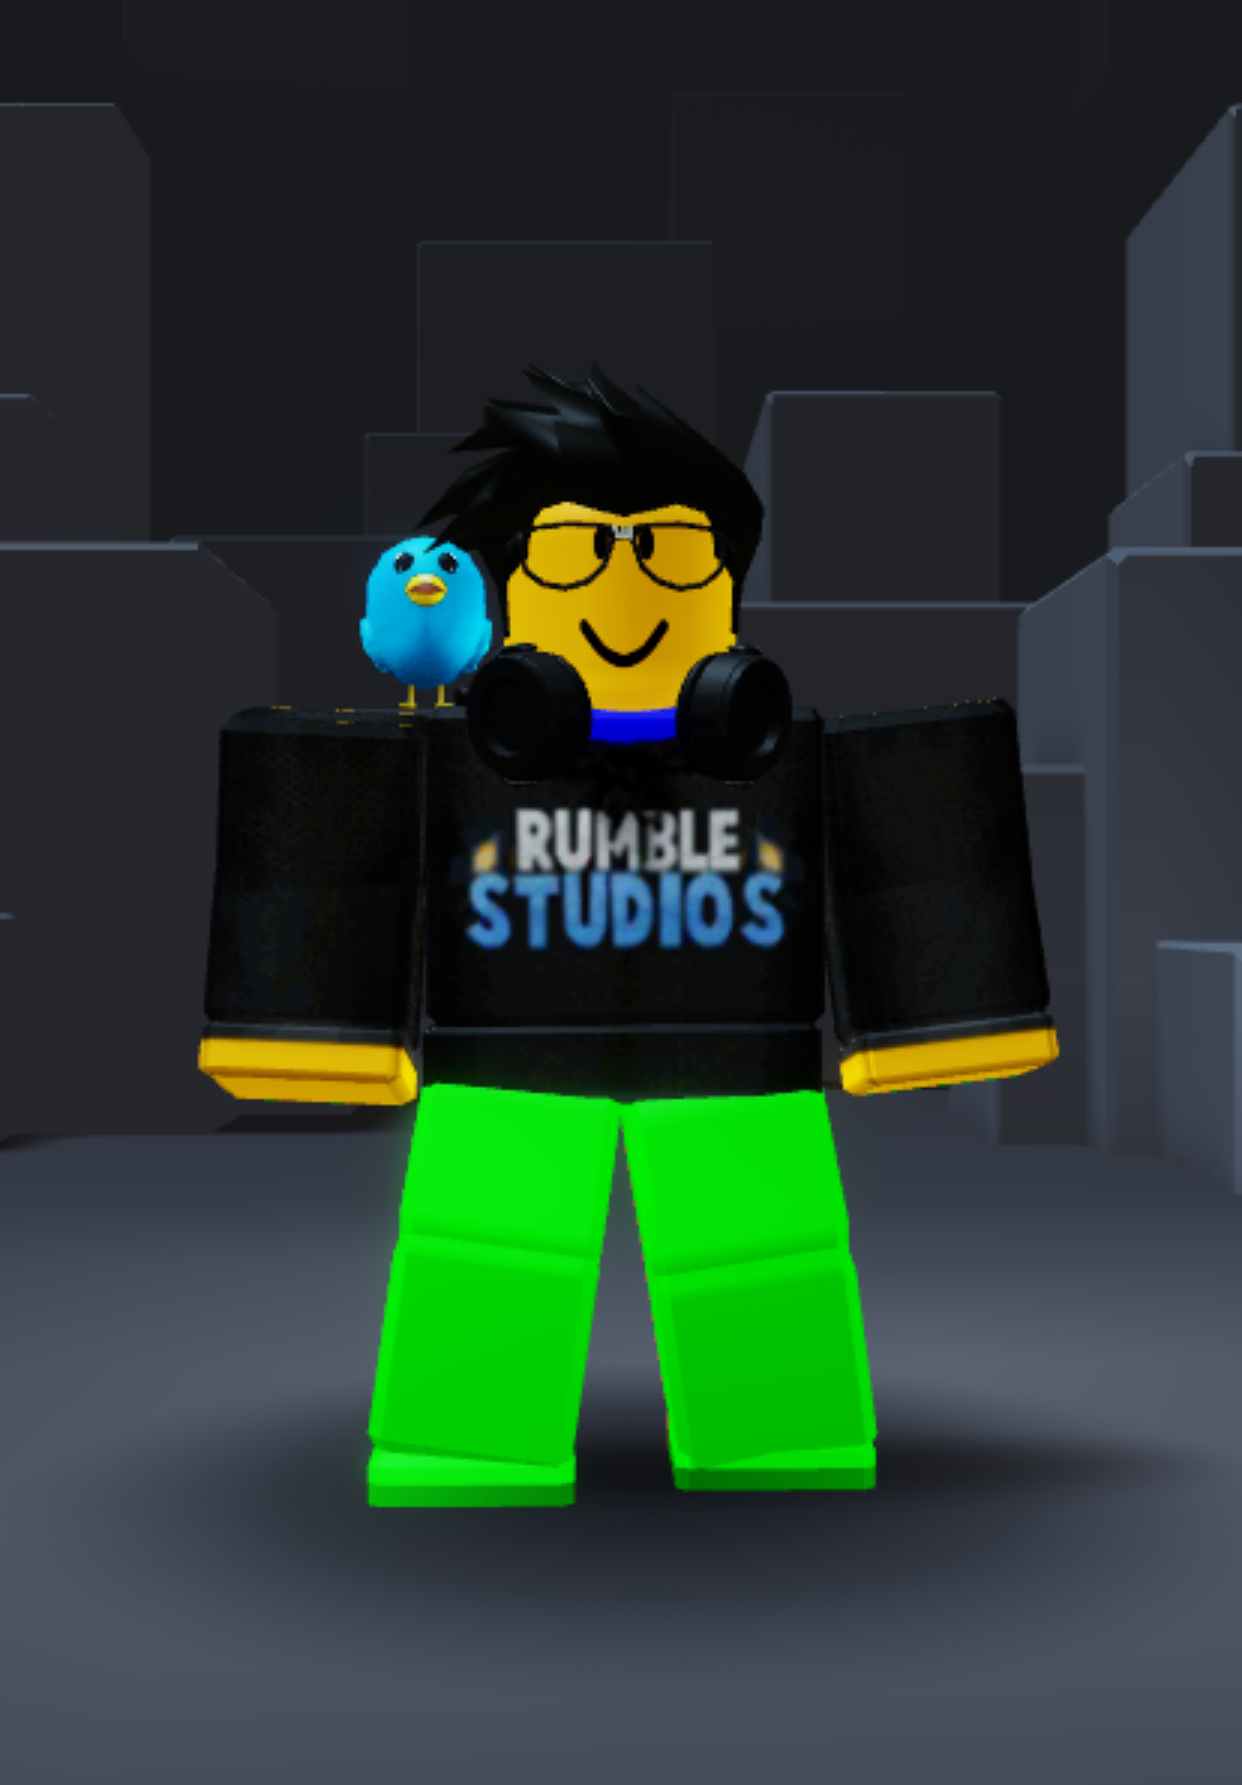 I Just Bought The Rumble Studios Hoodie But I Don T Like How It Looks On My Avatar Fandom - roblox rumble studios